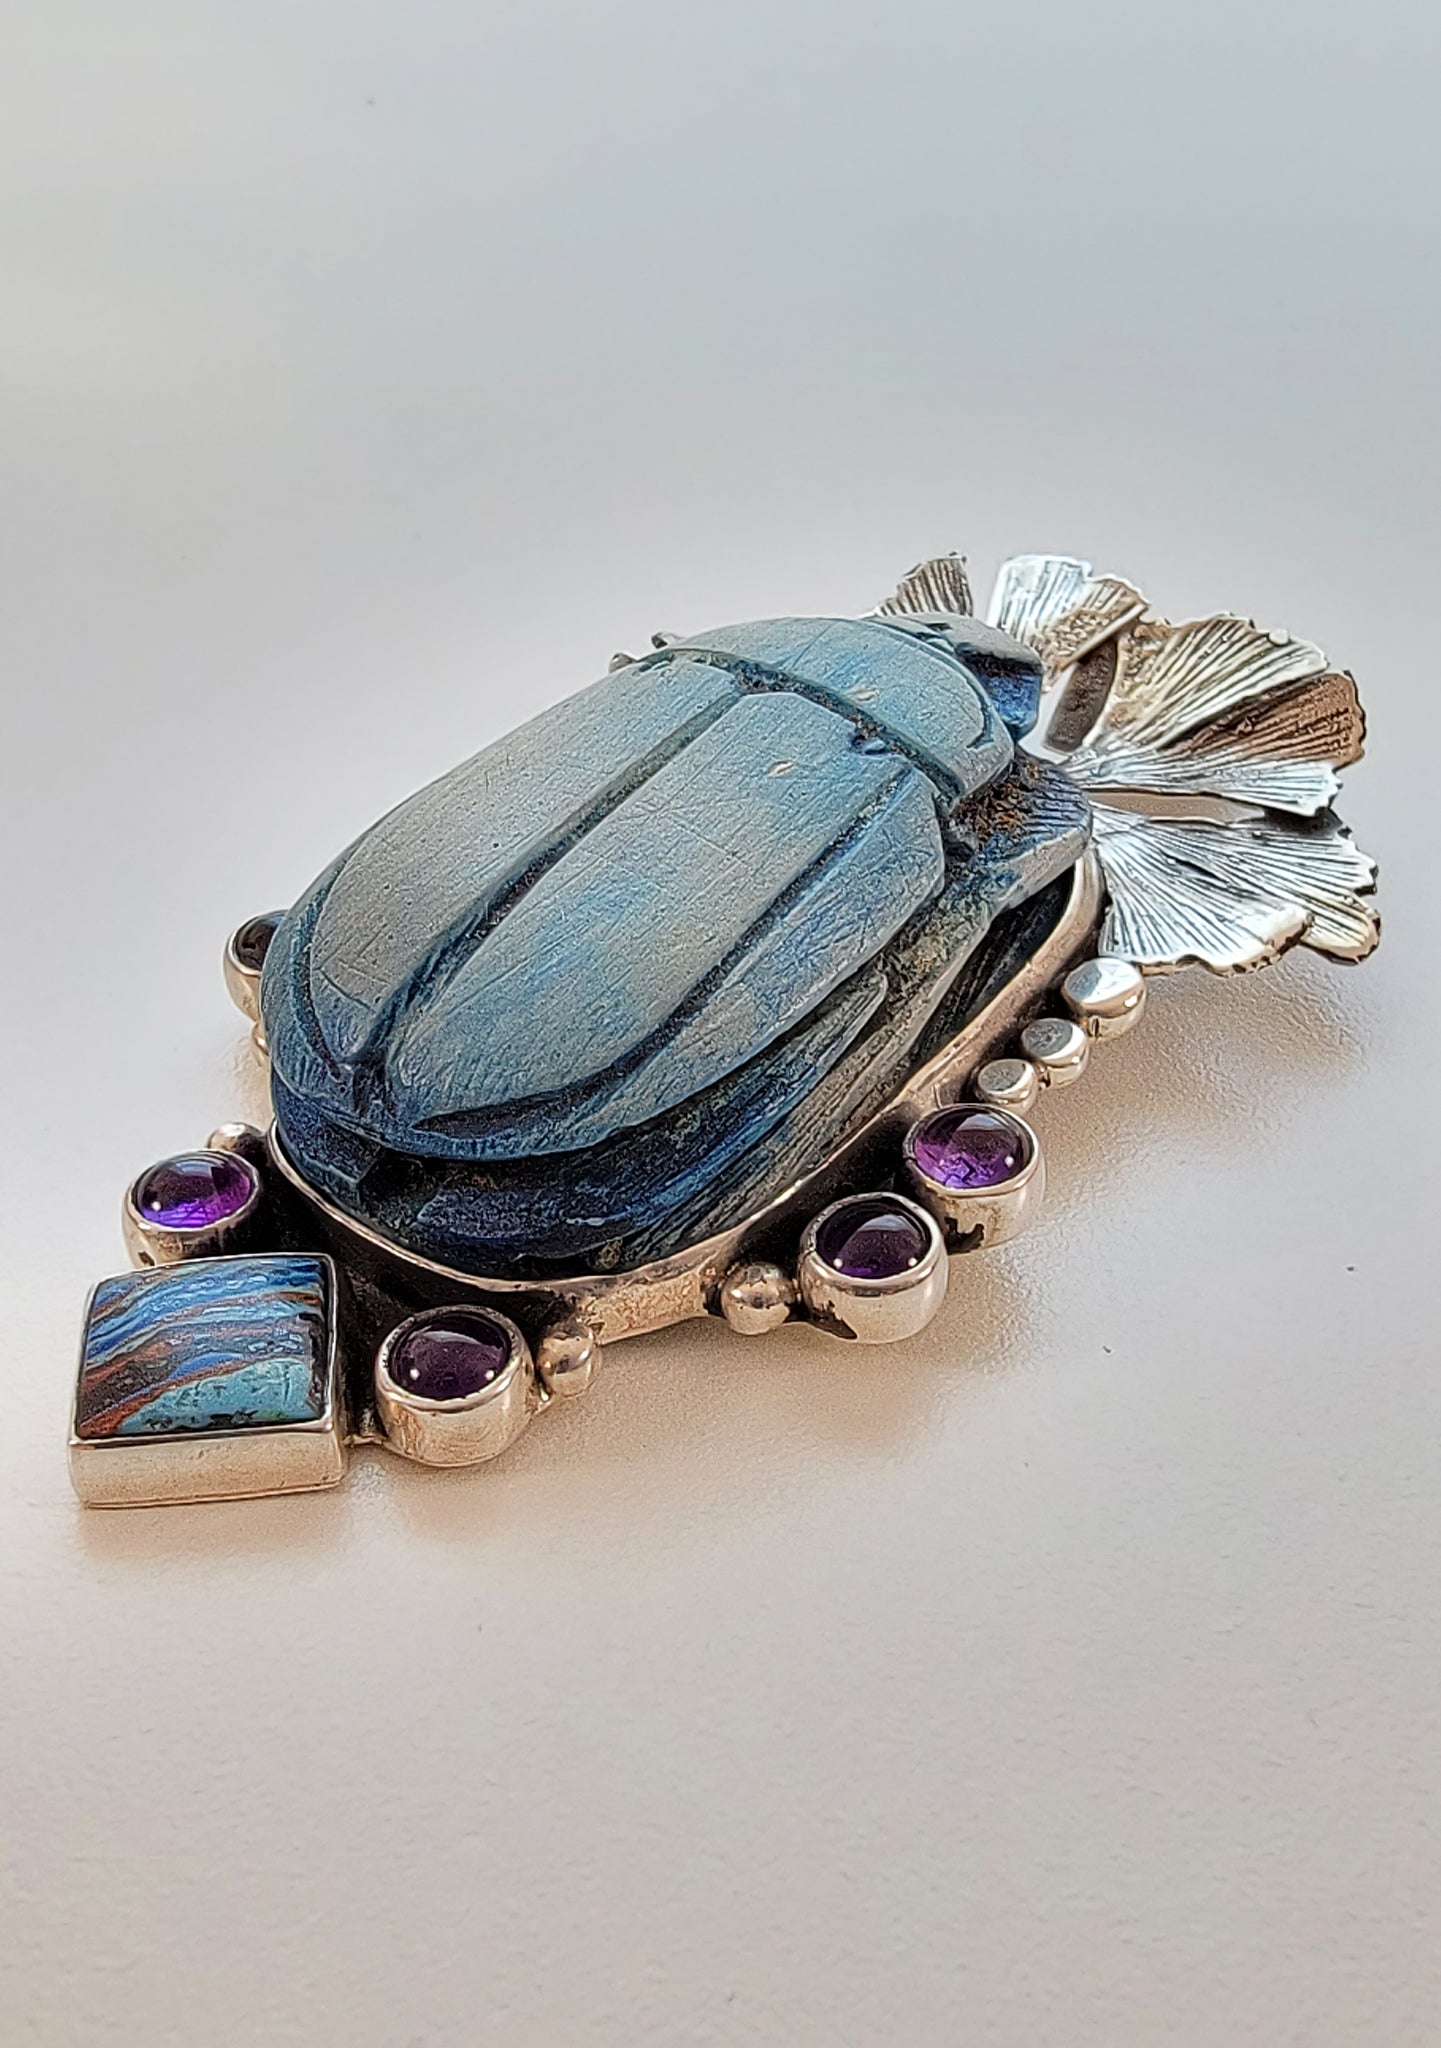 Egyptian Scarab Sterling Silver Pendant with Amethyst &amp; Rainbow Calsilica